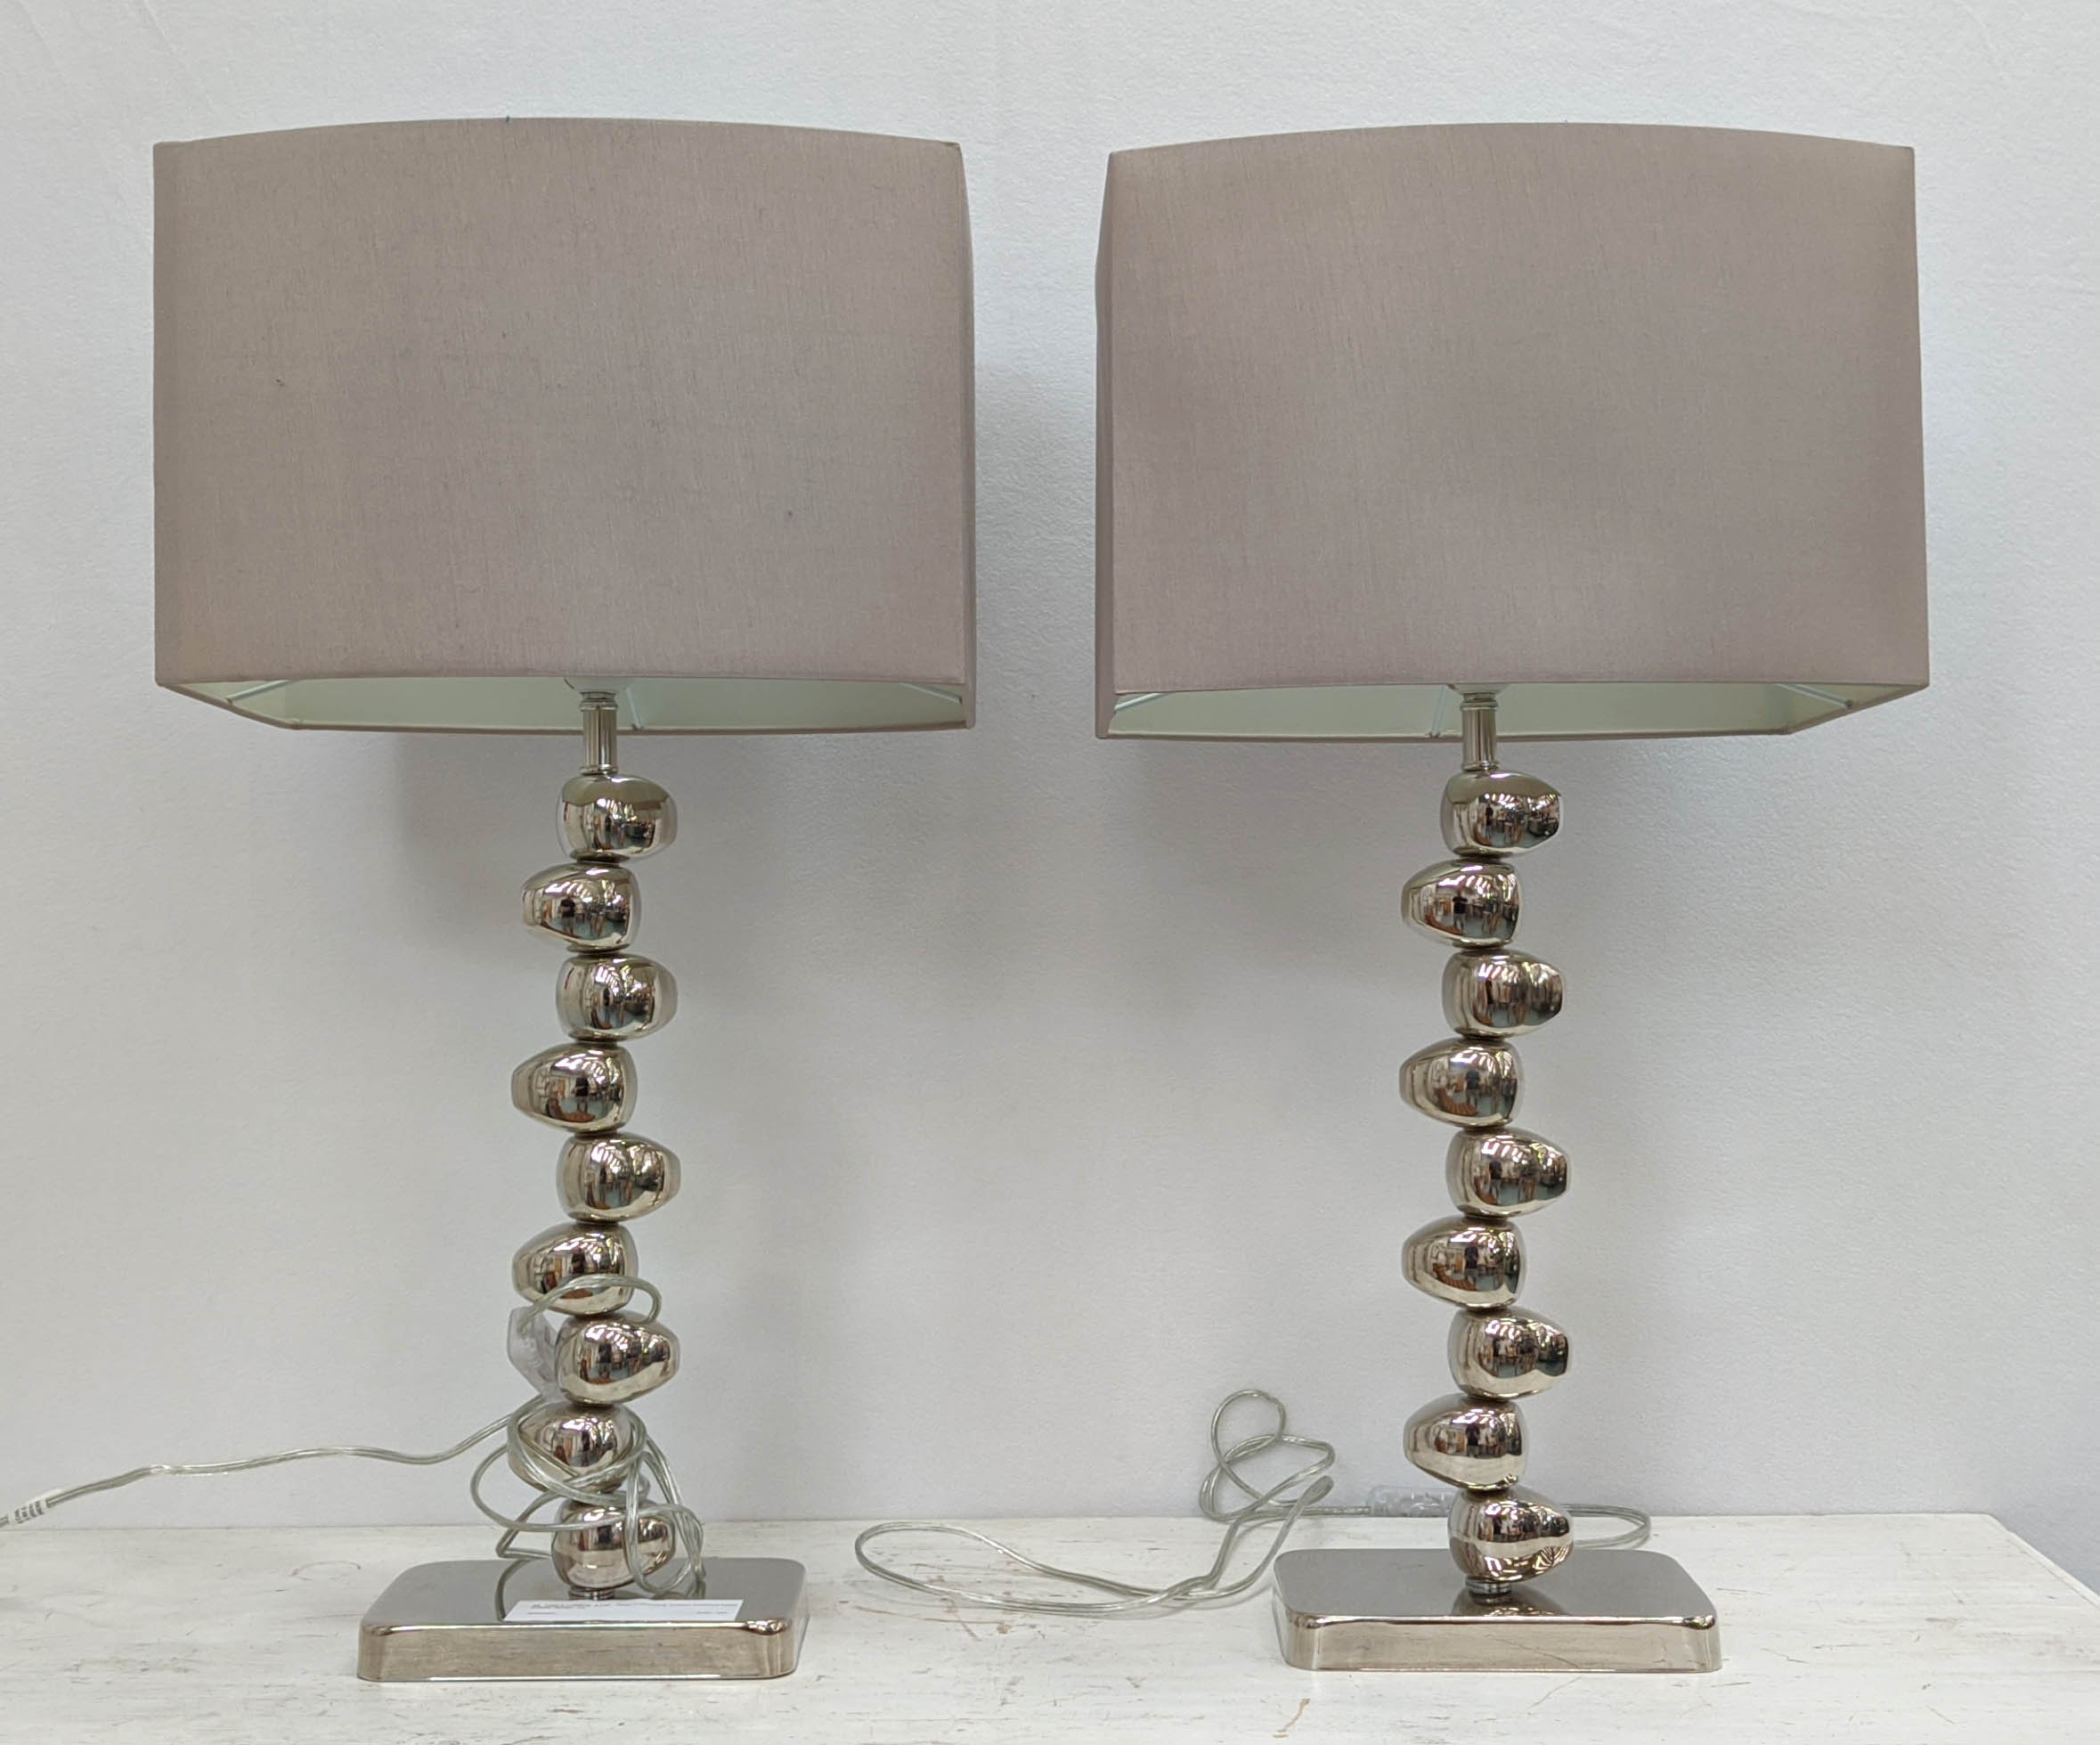 TABLE LAMPS, a pair, 70cm H including shades polished metal pebble design. (2)